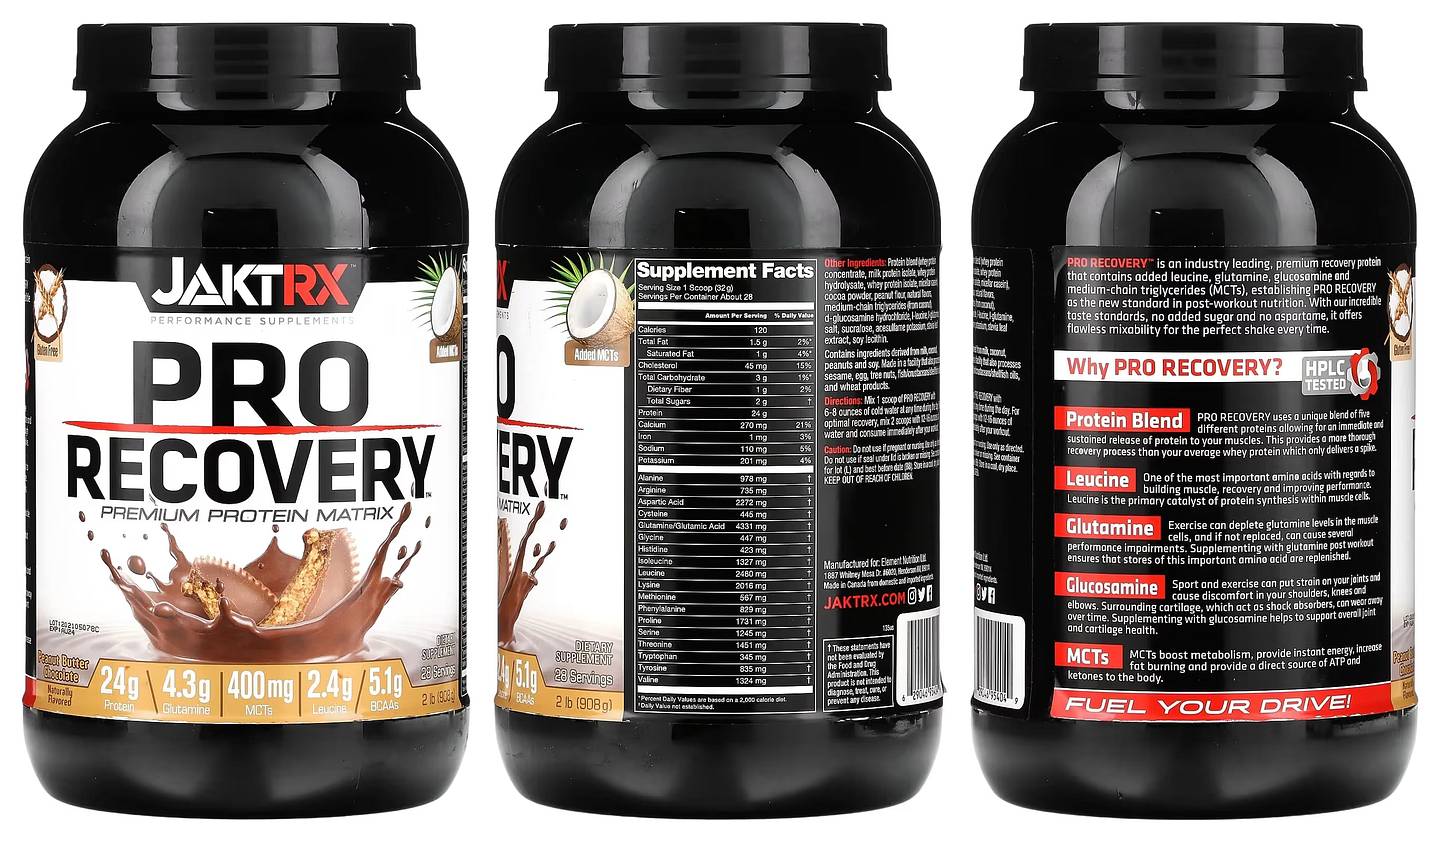 JAKTRX, Pro Recovery Premium Protein Matrix packaging